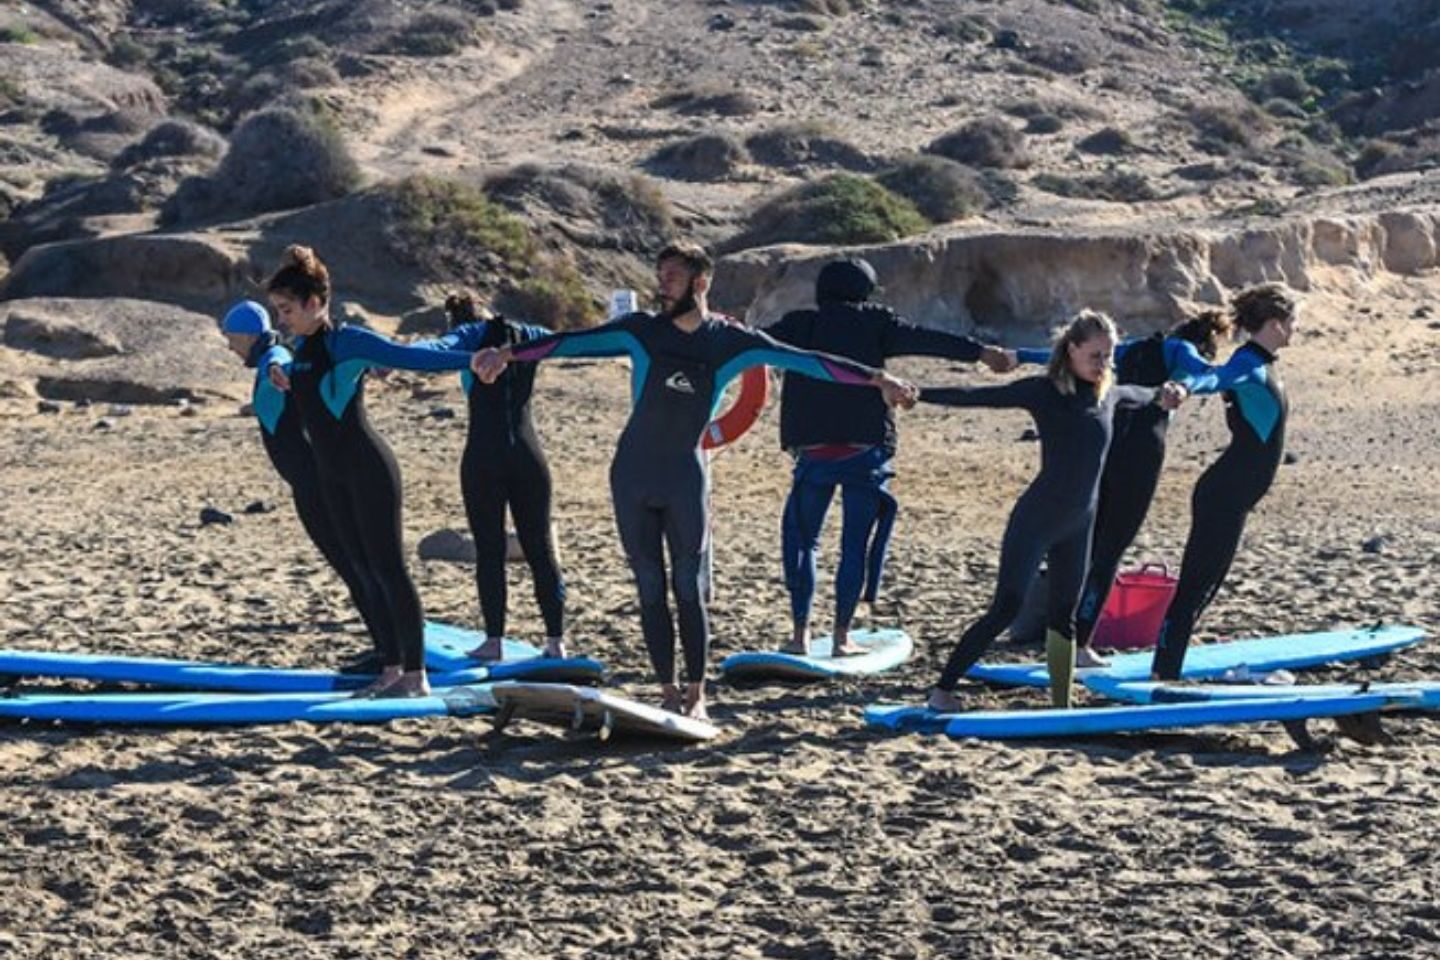 Surf training before jumping on the water